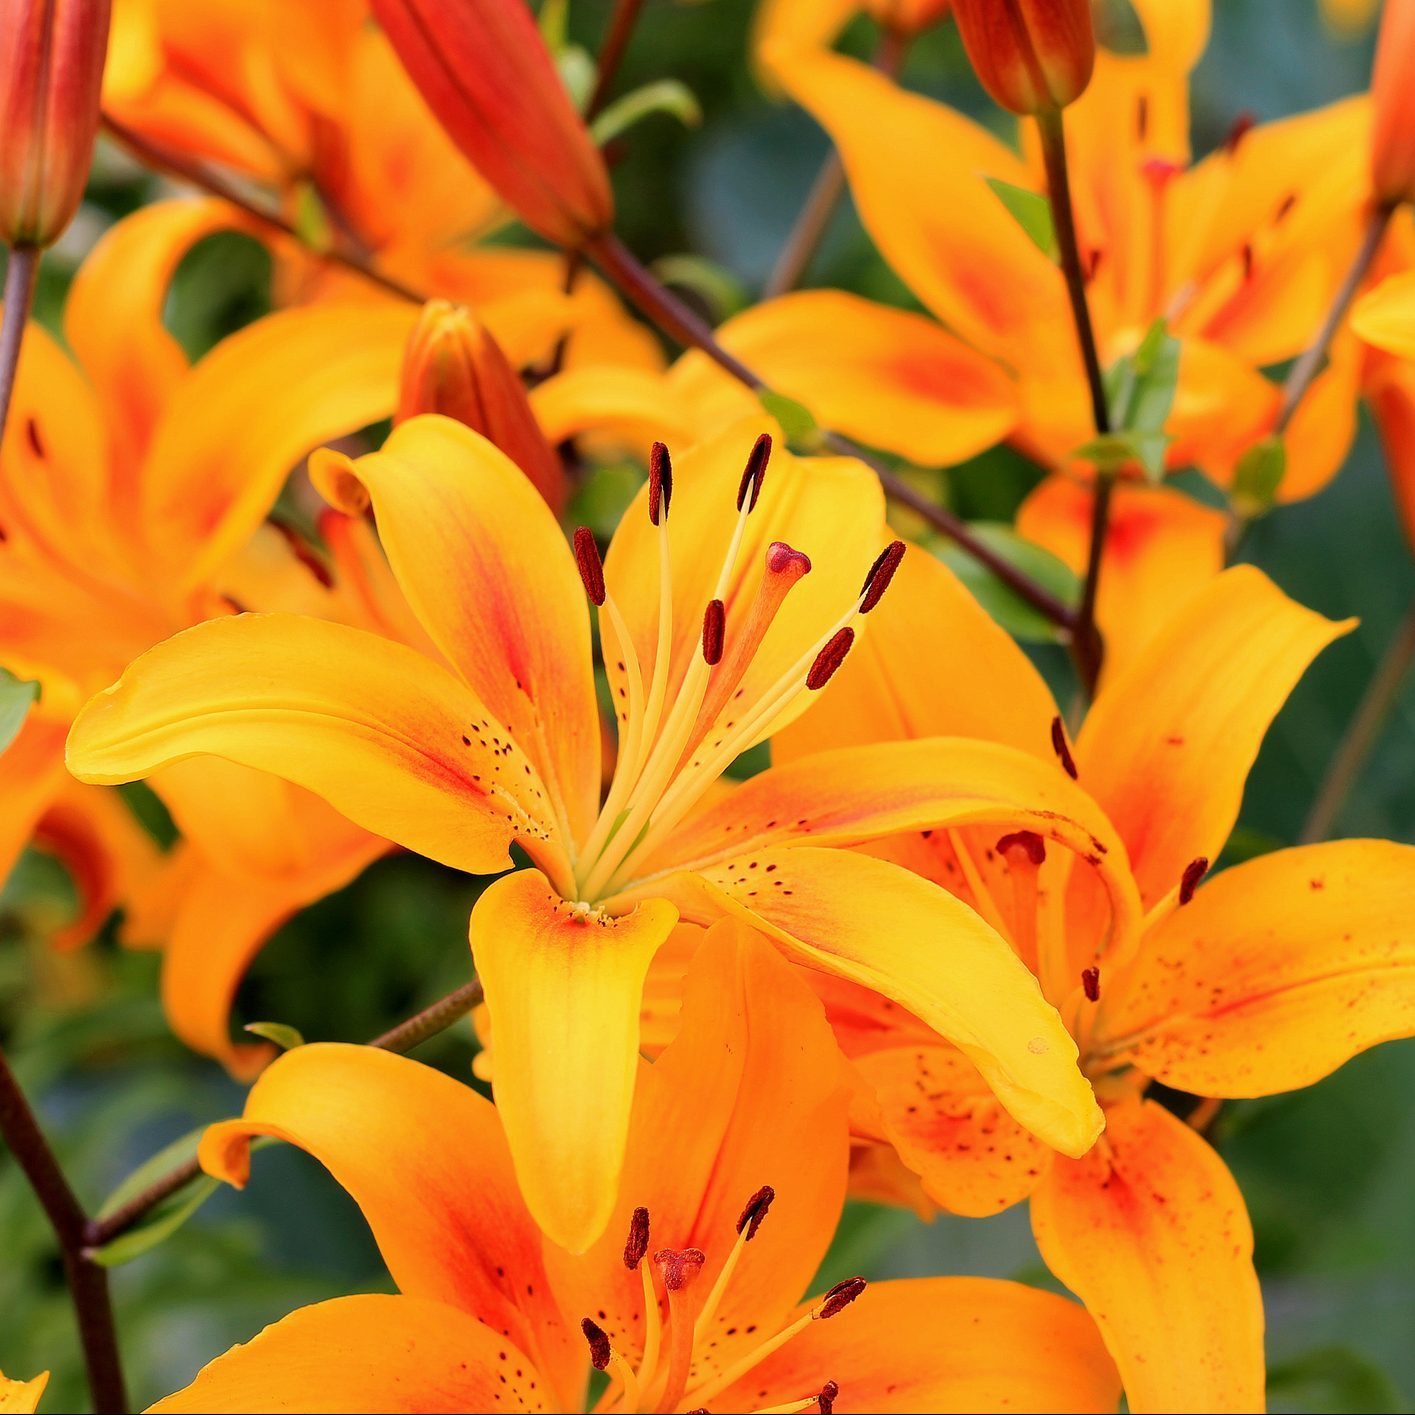 Yellow asiatic hybrid lilies on flowerbed. Bouquet of fresh flowers growing in summer garden. Close-up.